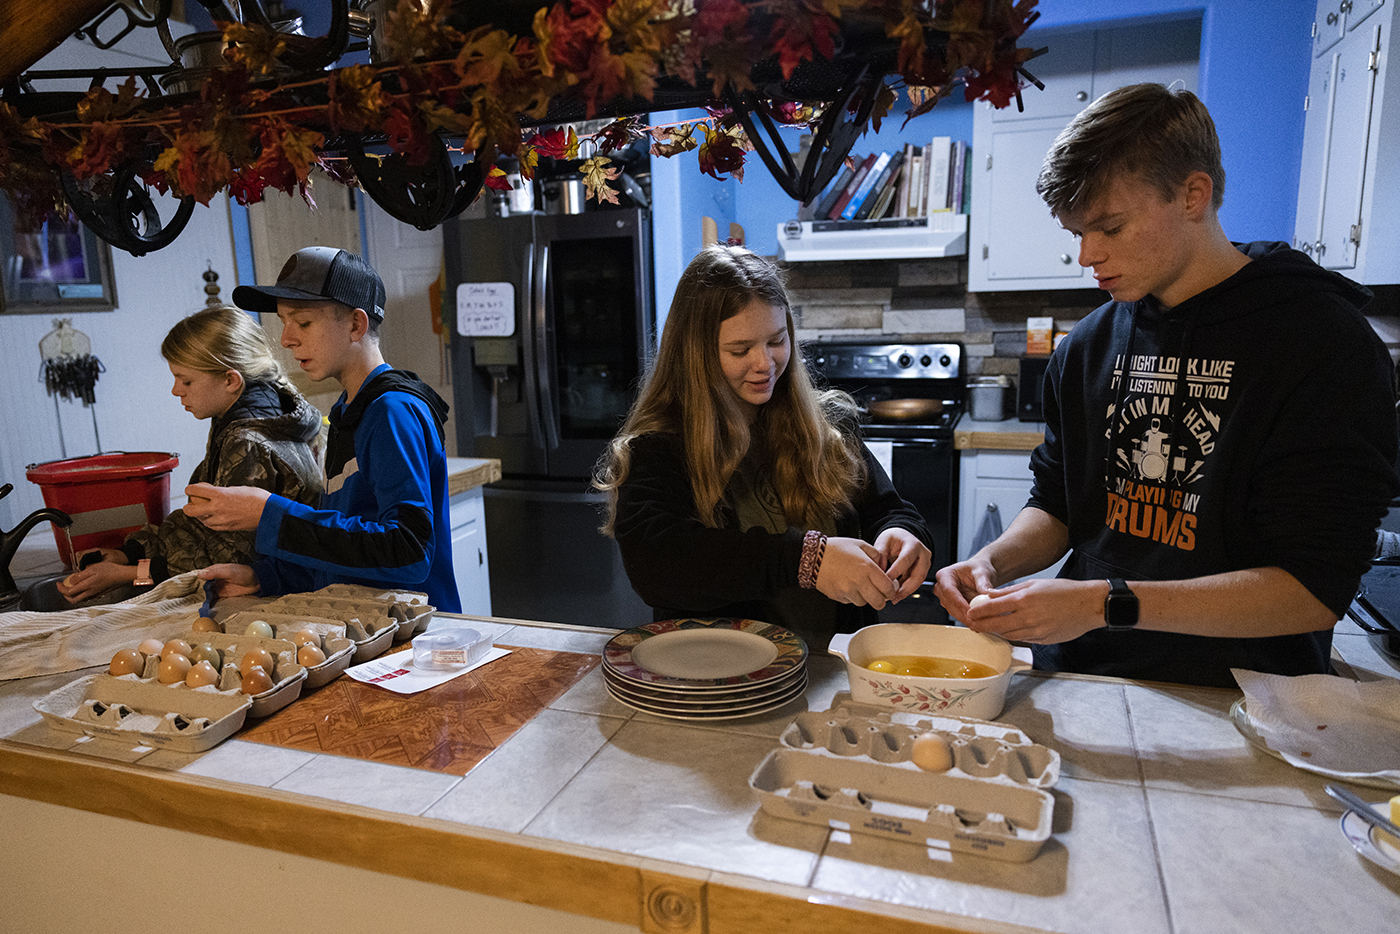 Bernadette Clements, 11, and JohnPaul Clements, 13, wash freshly picked eggs while their siblings Veronica and Nicholas crack eggs to prepare breakfast at the Clements Family Farm in Santa Fe